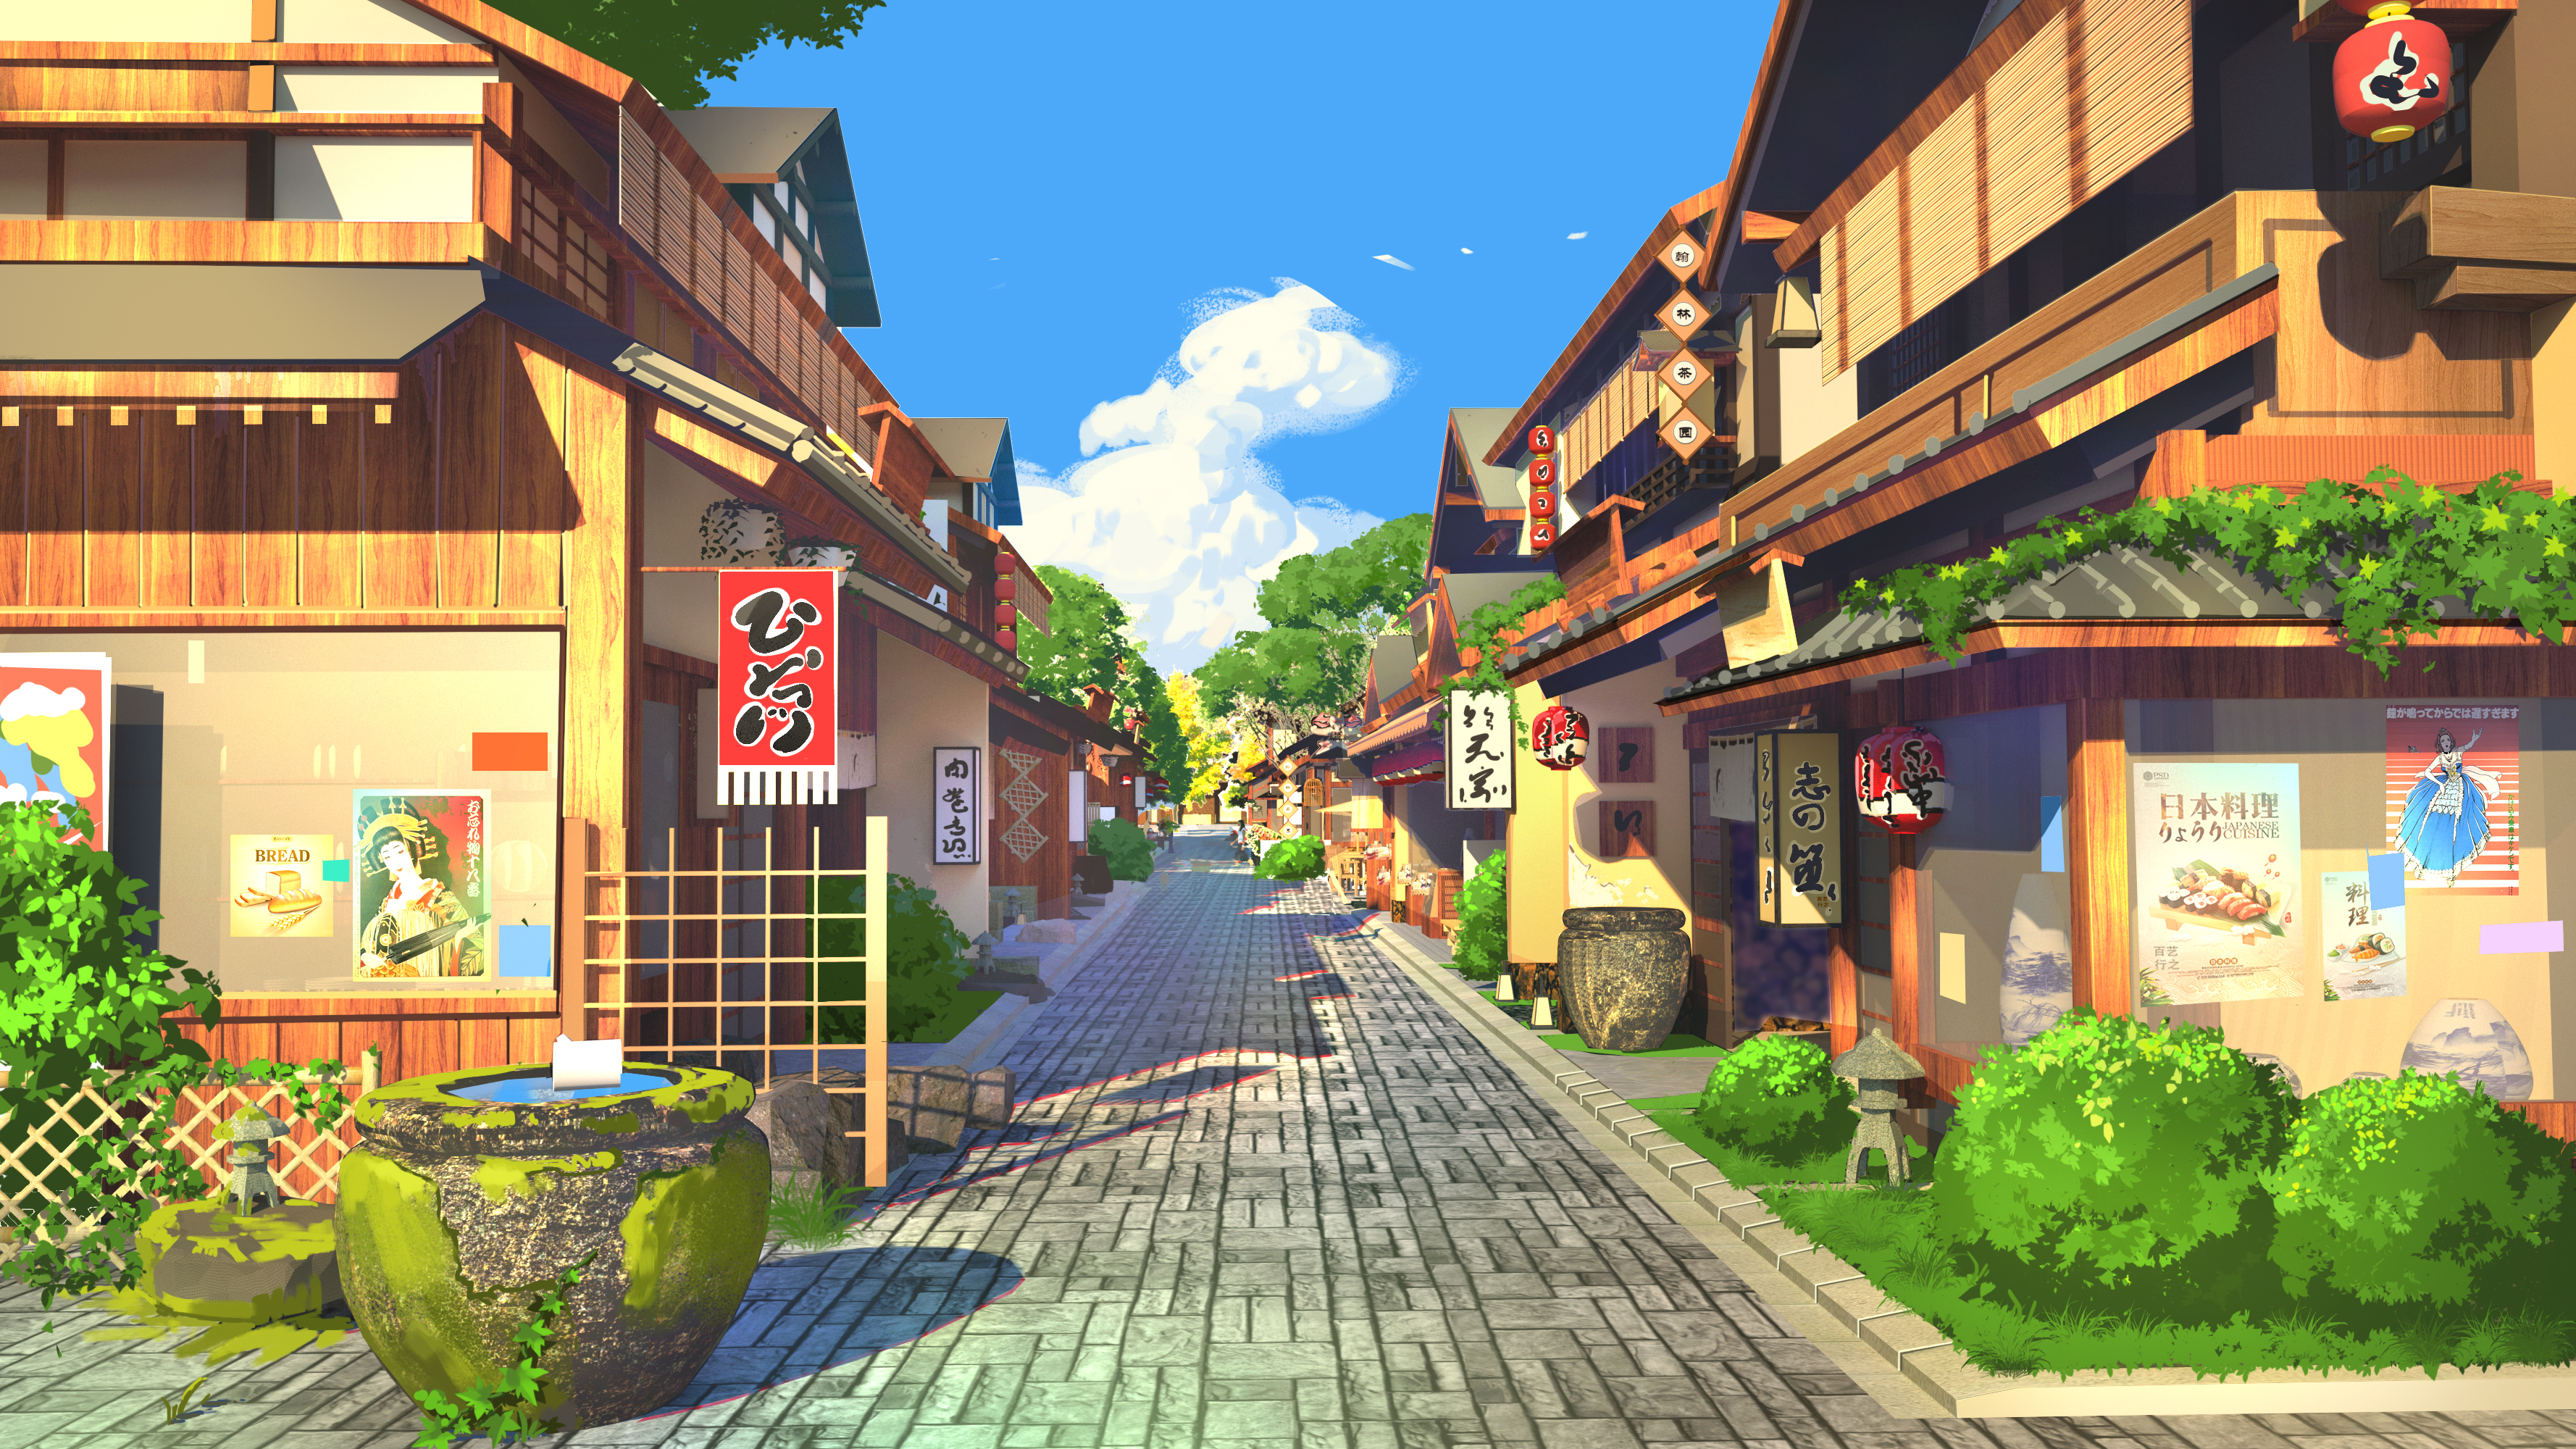 Wallpaper, lv, Touhou, Game CG, Background Art, sky, clouds, street, Chinese architecture, digital art, daylight, trees, plant pot 3556x2000